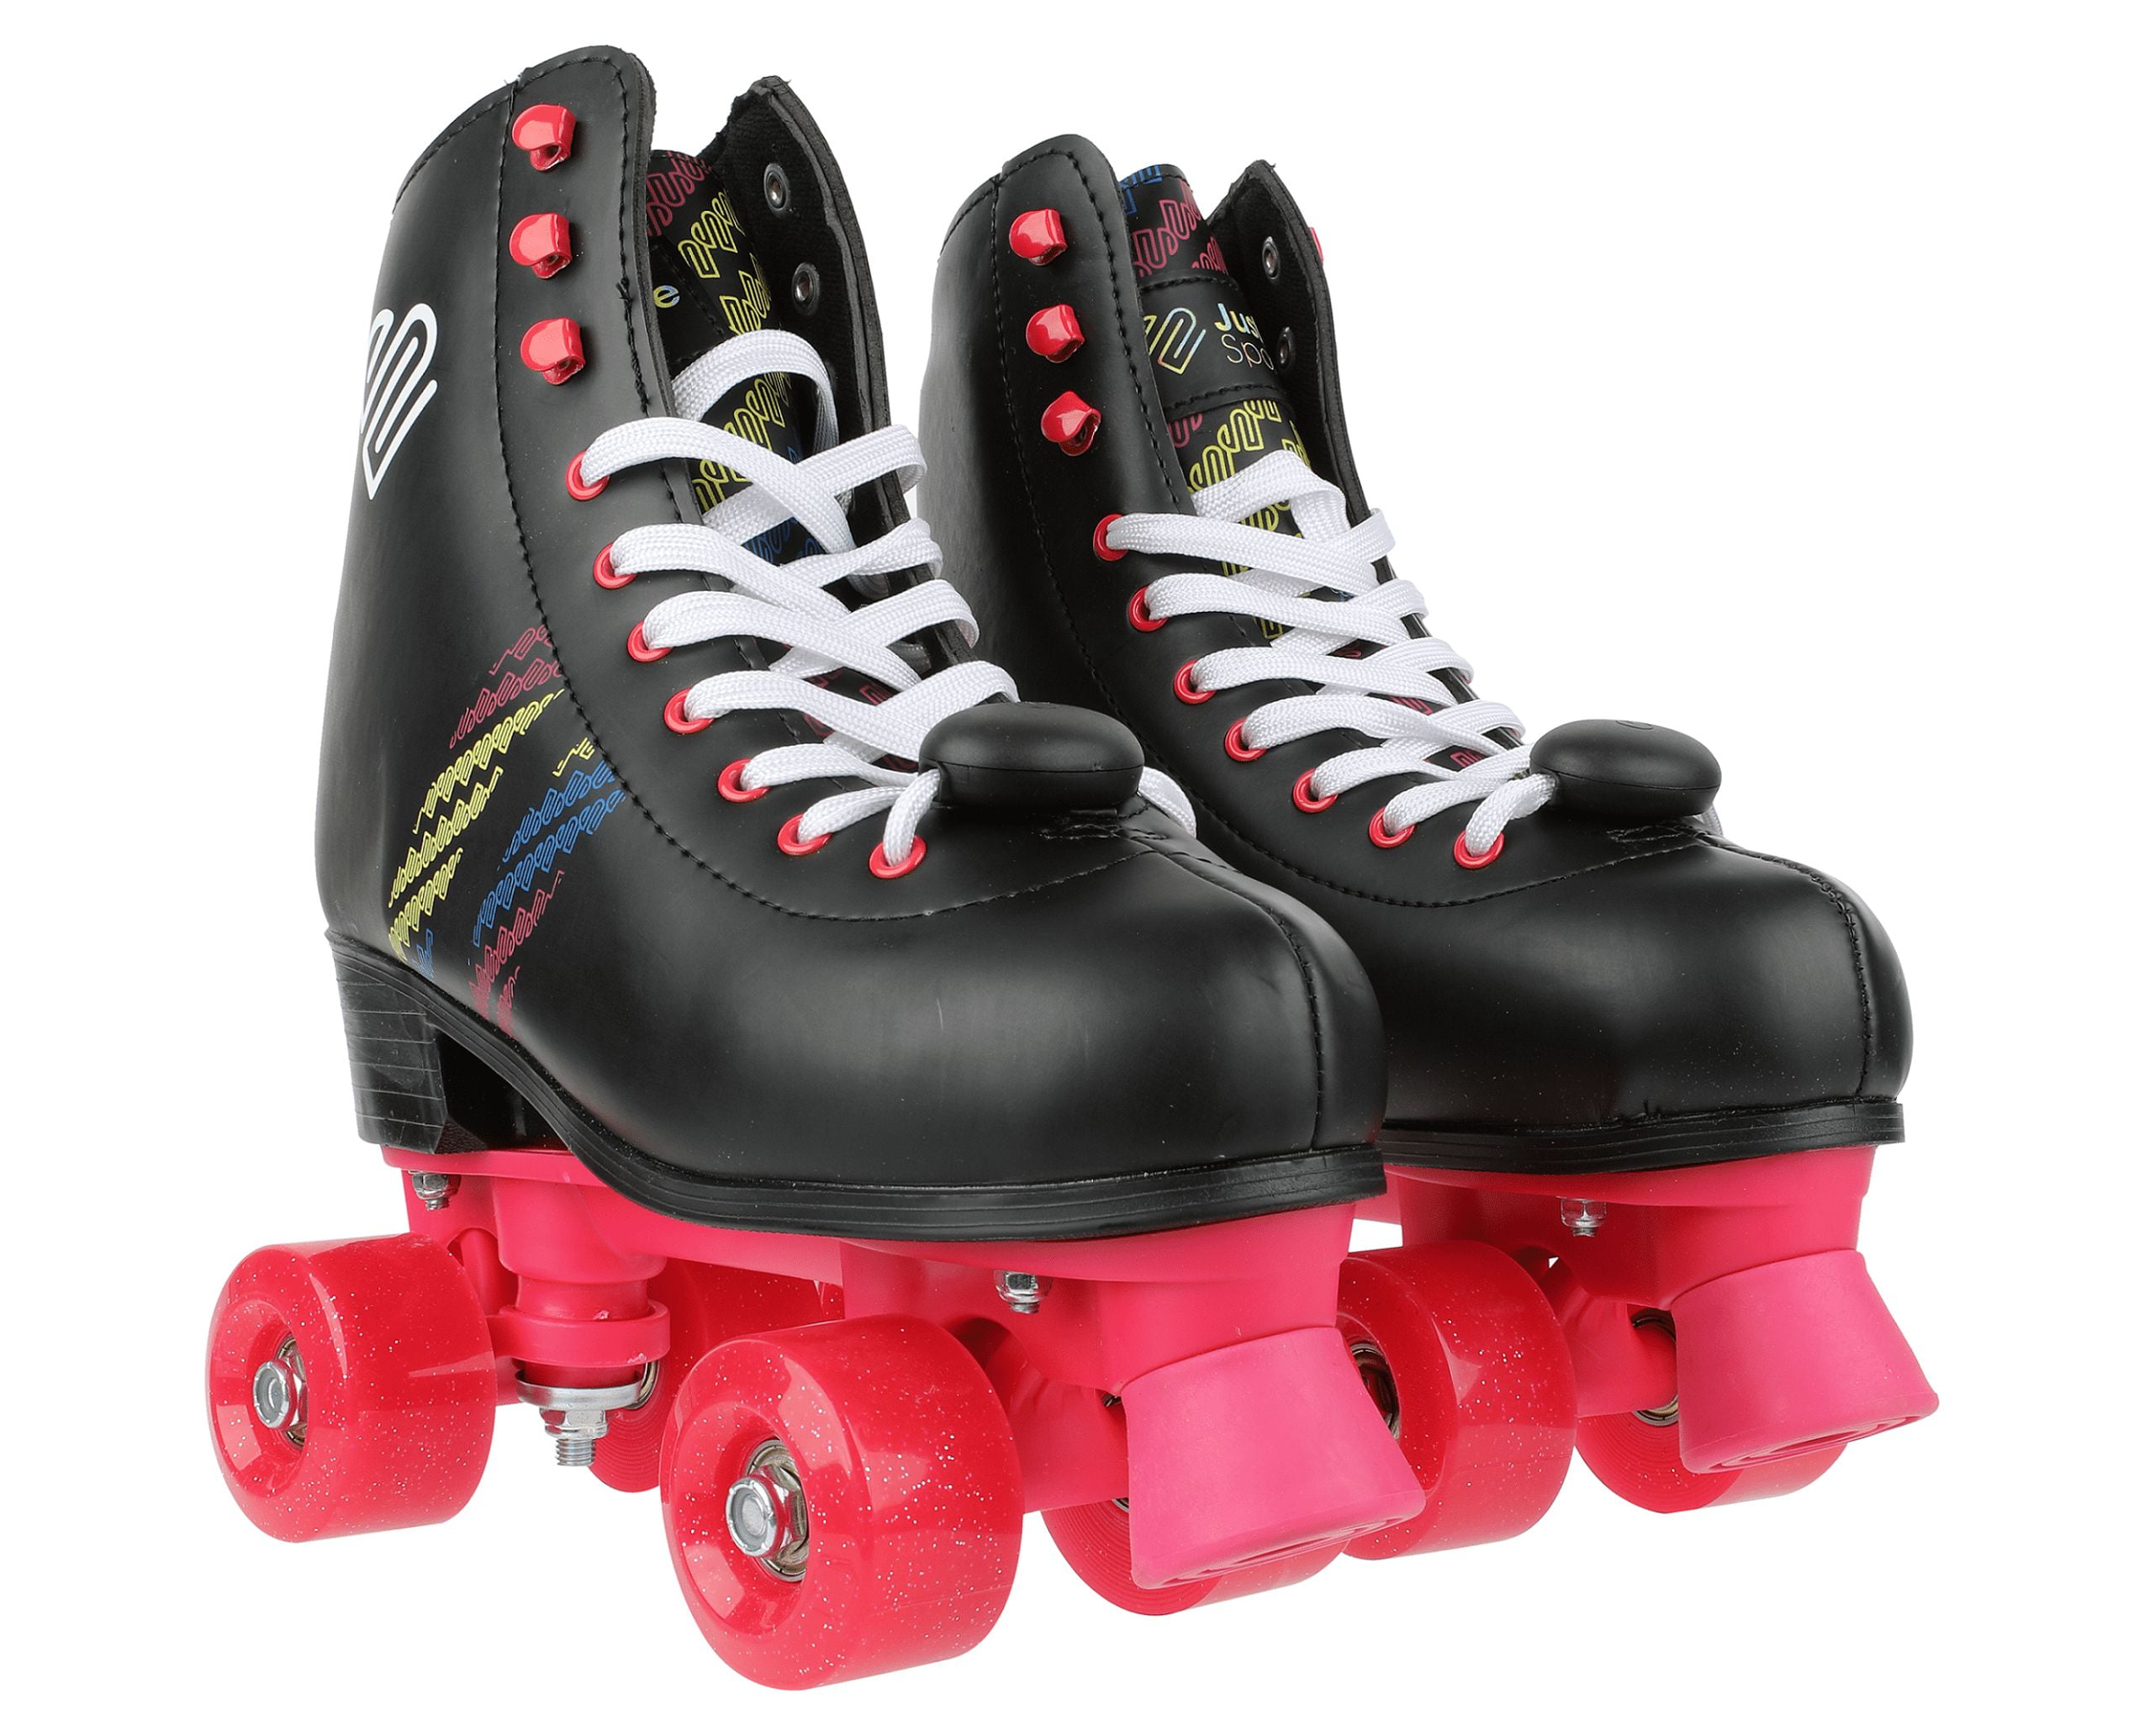 Justice Girls 4 Wheel Roller Skates with Adjustable Sizing (3-6) for Girls  Ages 7+